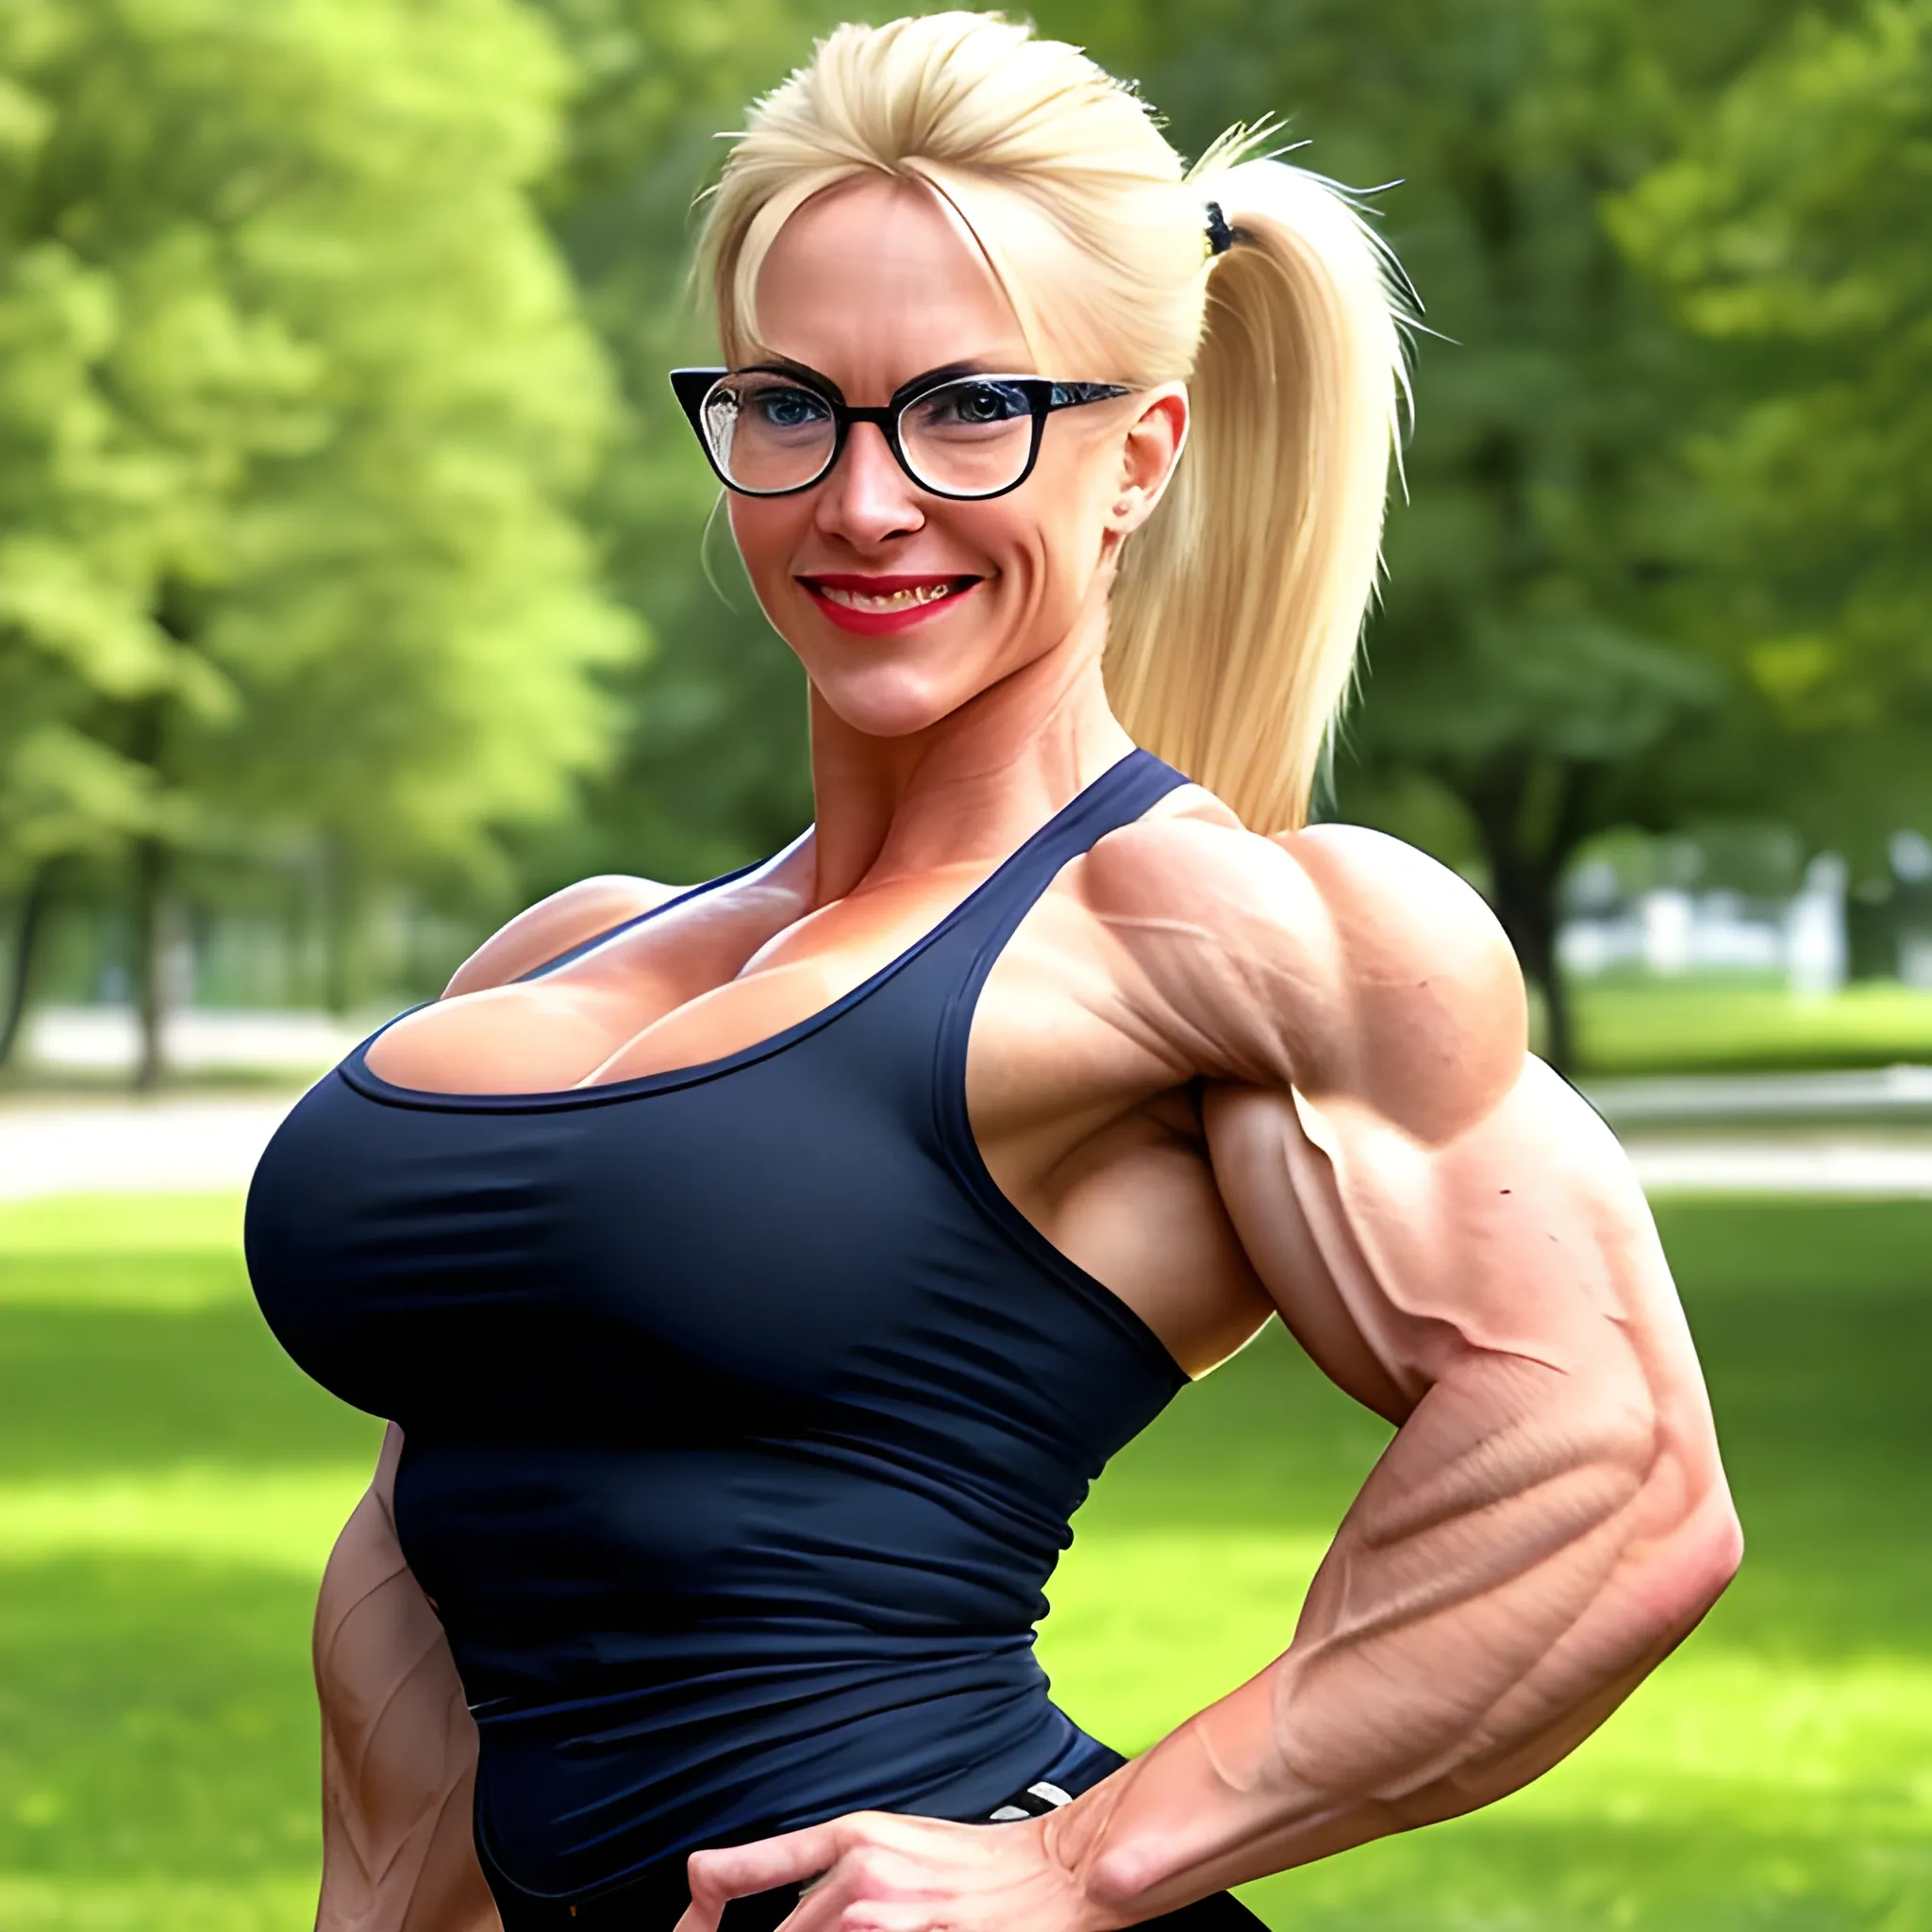 a triumphant beautiful Swedish woman, extremely muscular professional female bodybuilder, with blonde ponytail, wearing white button down oxford shirt, and with extremely narrow hips and extremely narrow waist, with tight muscular buttocks, with wide-set eyes, with expressive blue eyes wearing black rimmed eyeglasses, with full red lips, smiling suggestively, with massive biceps peaks, perfect in every way, walking in park, low angle view